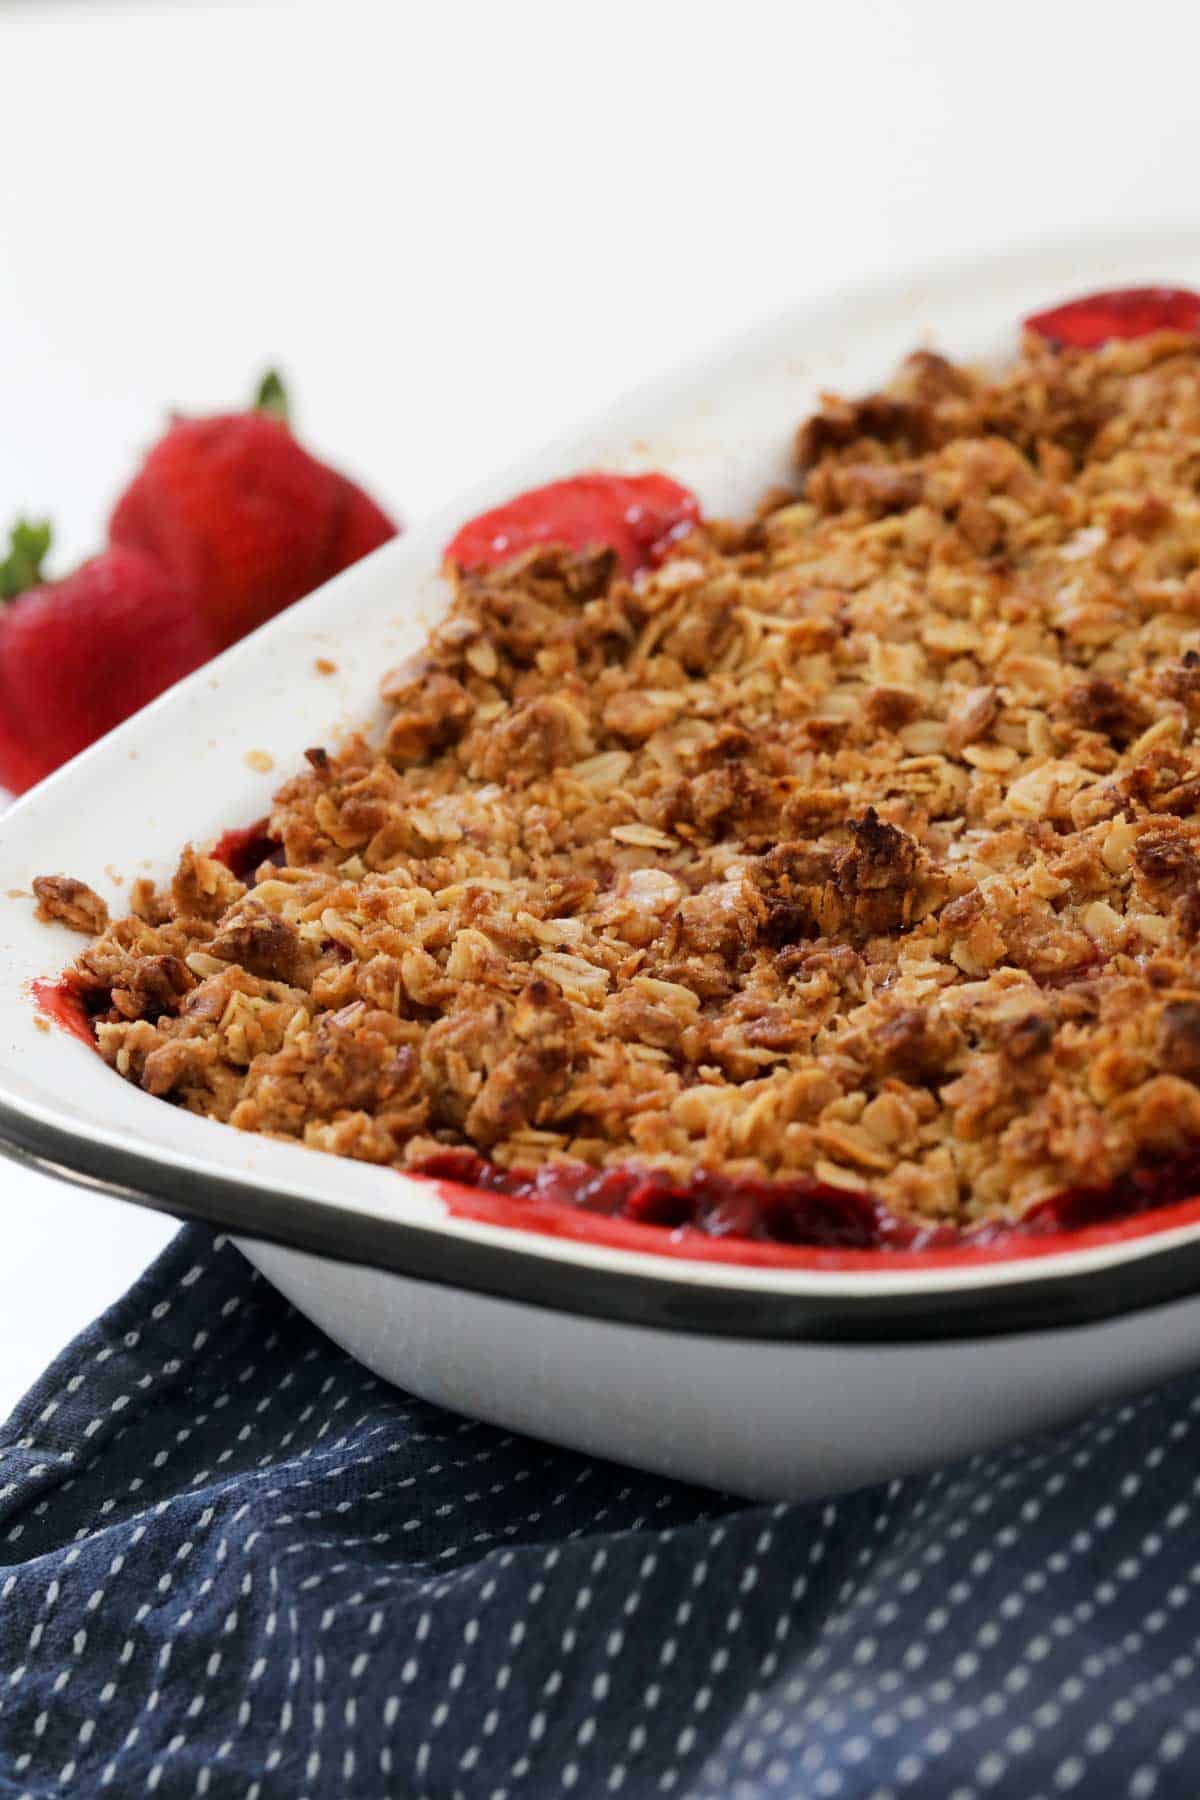 Baked fruit crumble in a white baking dish.